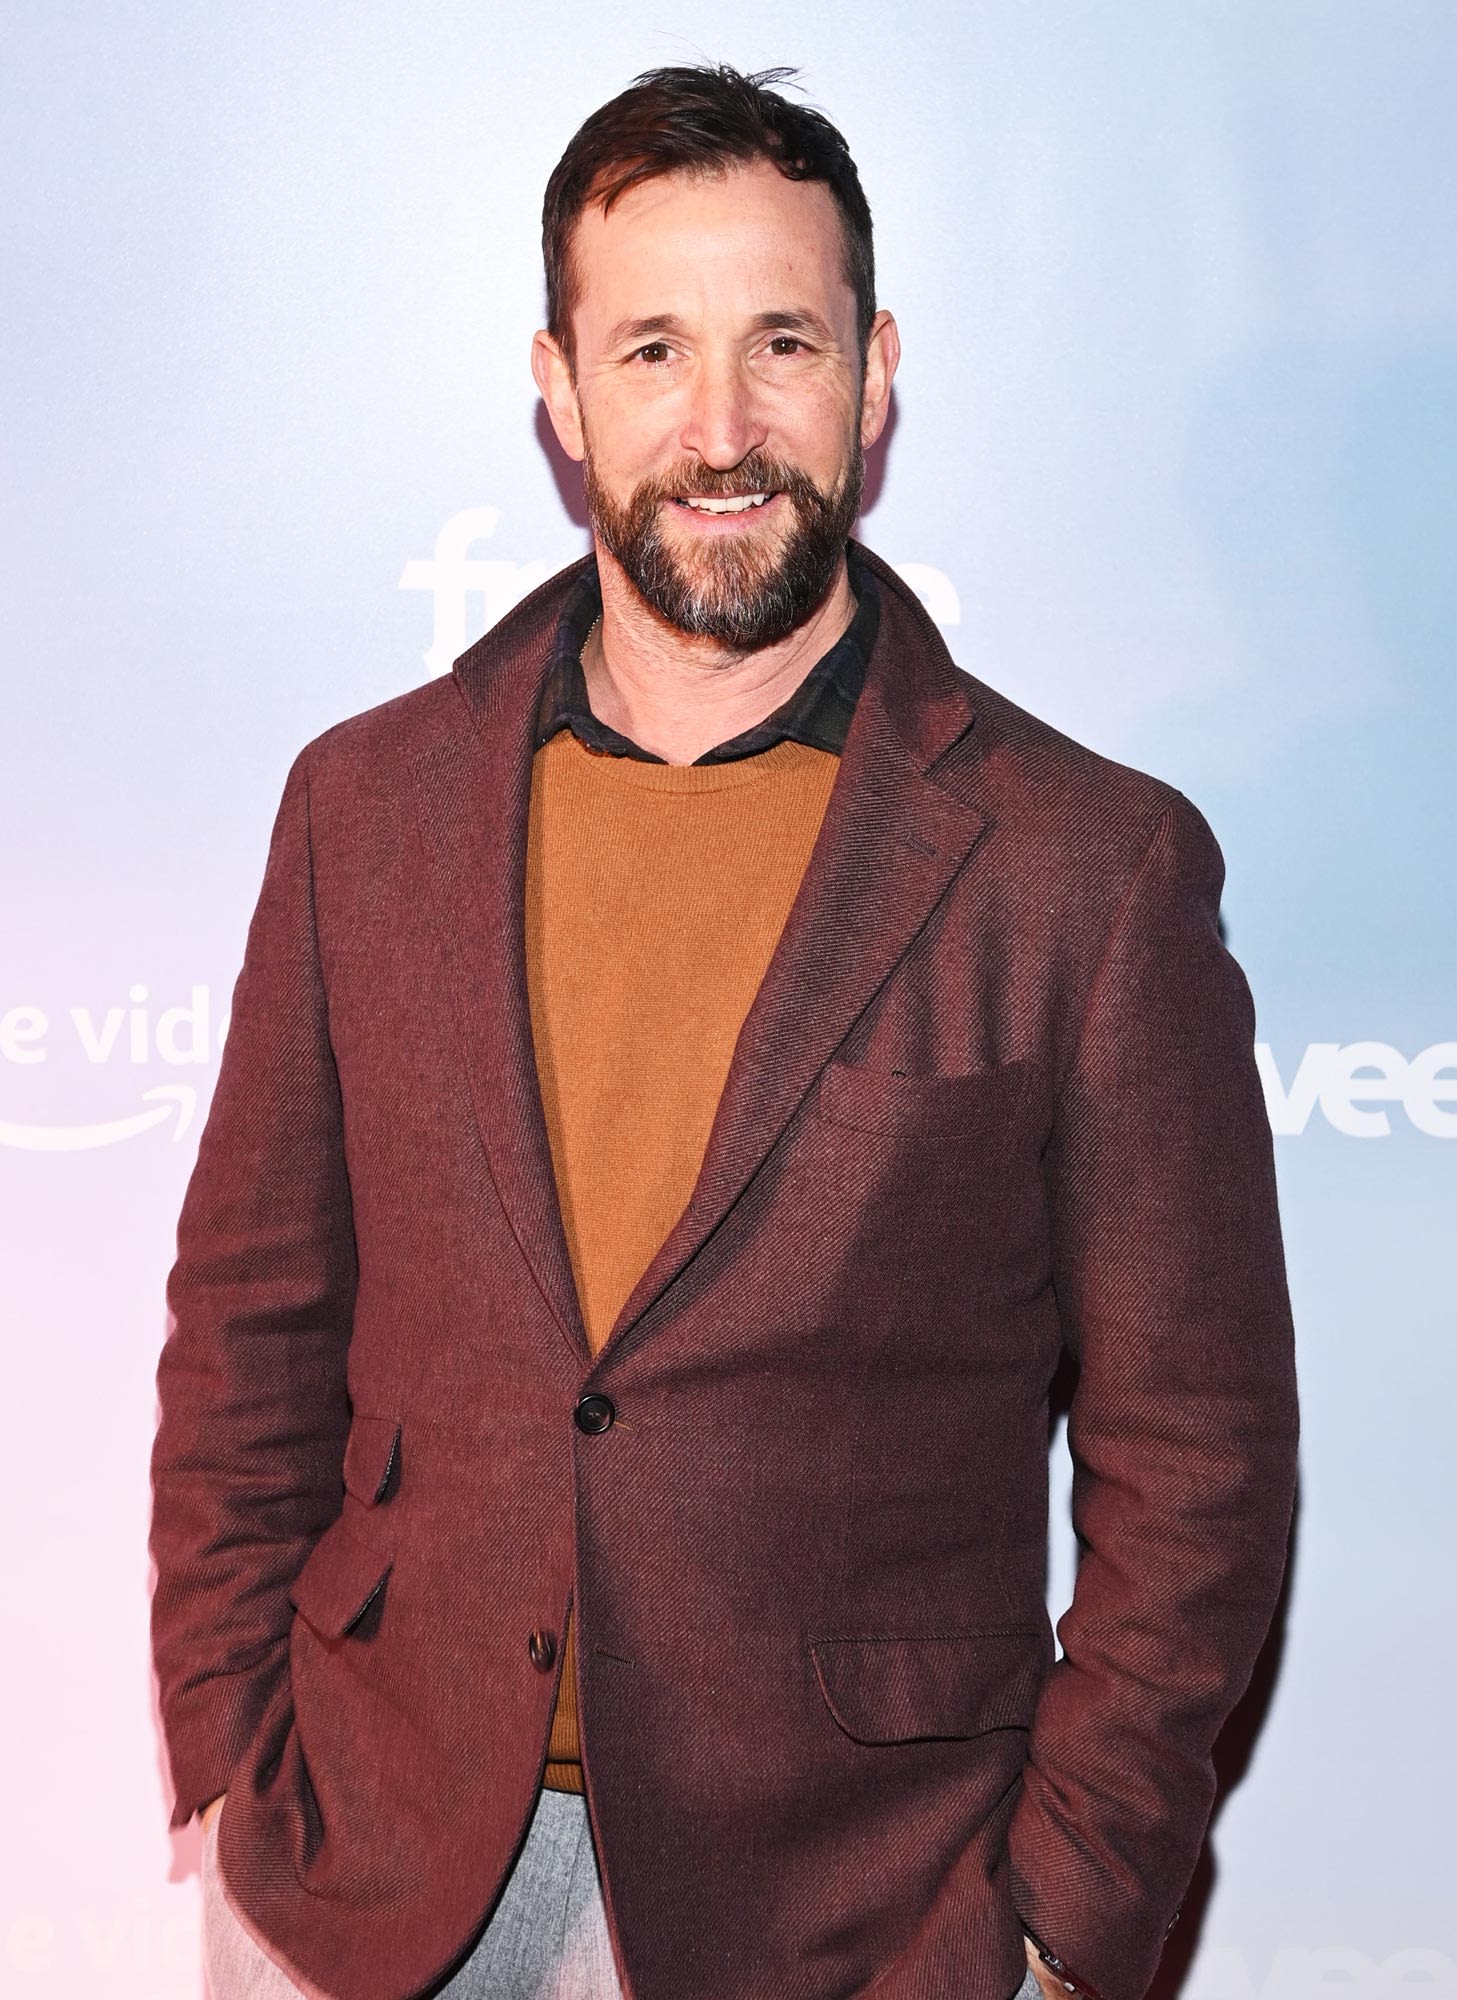 Noah Wyle Says His Nurse Mom Used to Critique His Performance on ‘ER’ Every Week